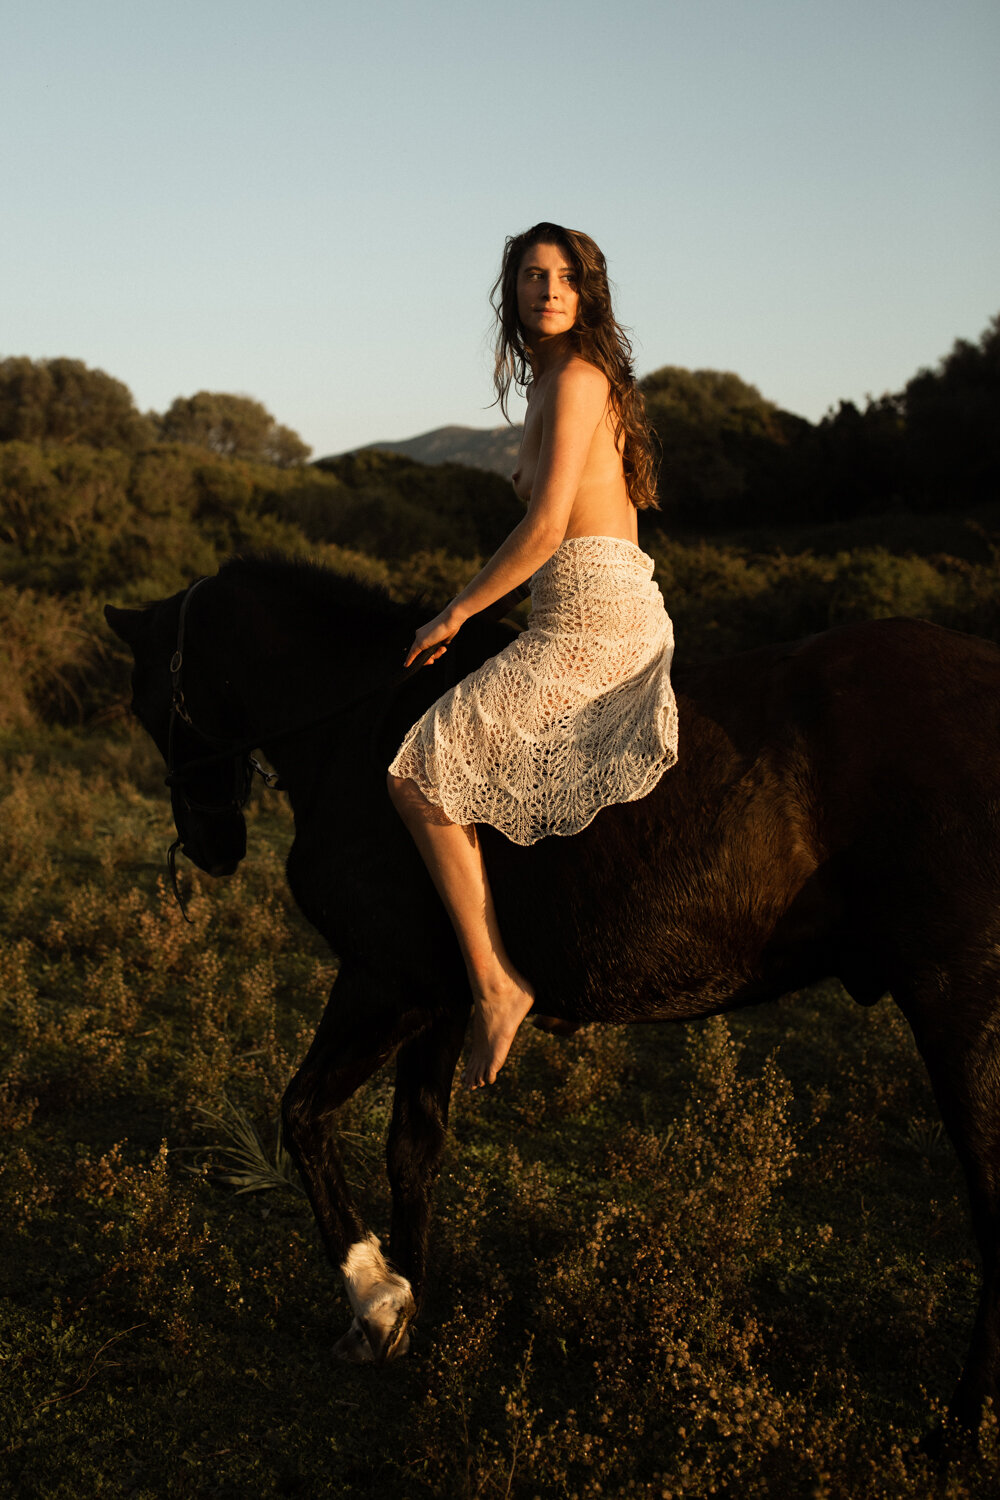 Immortale corsica corse beauty products beautiful horse model produits beaute beach travel Krista Espino sea island mediterranean photographe photographer fashion lifestyle editorial nature natural france french skin skincare face mask rose country-16.jpg